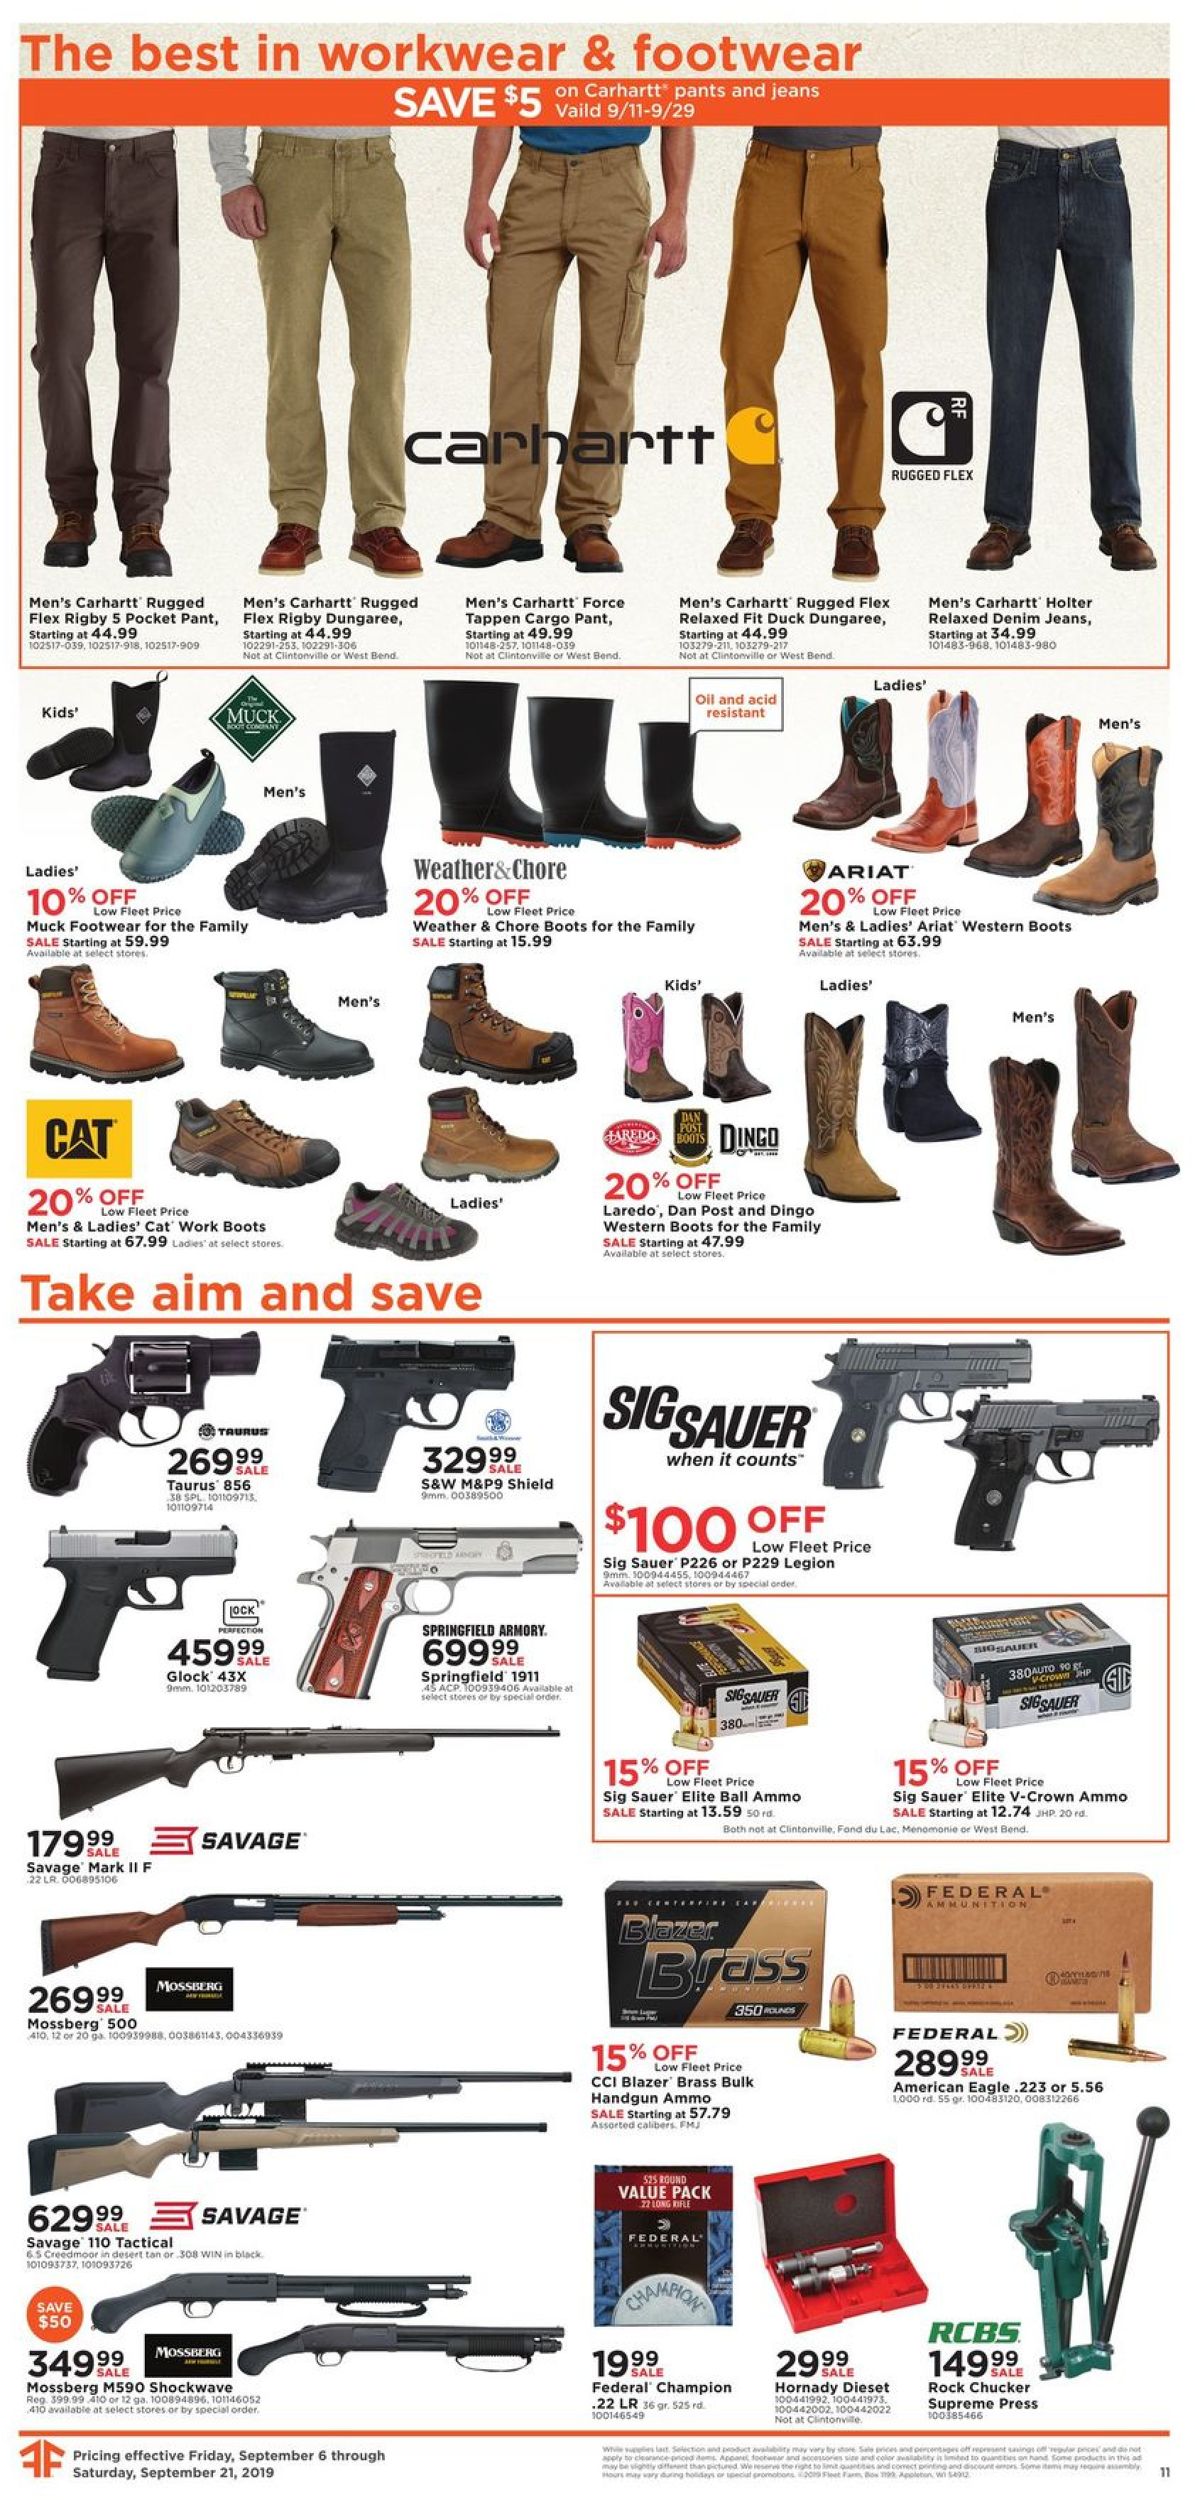 Mills Fleet Farm Current weekly ad 09/06 - 09/21/2019 [11] - frequent ...